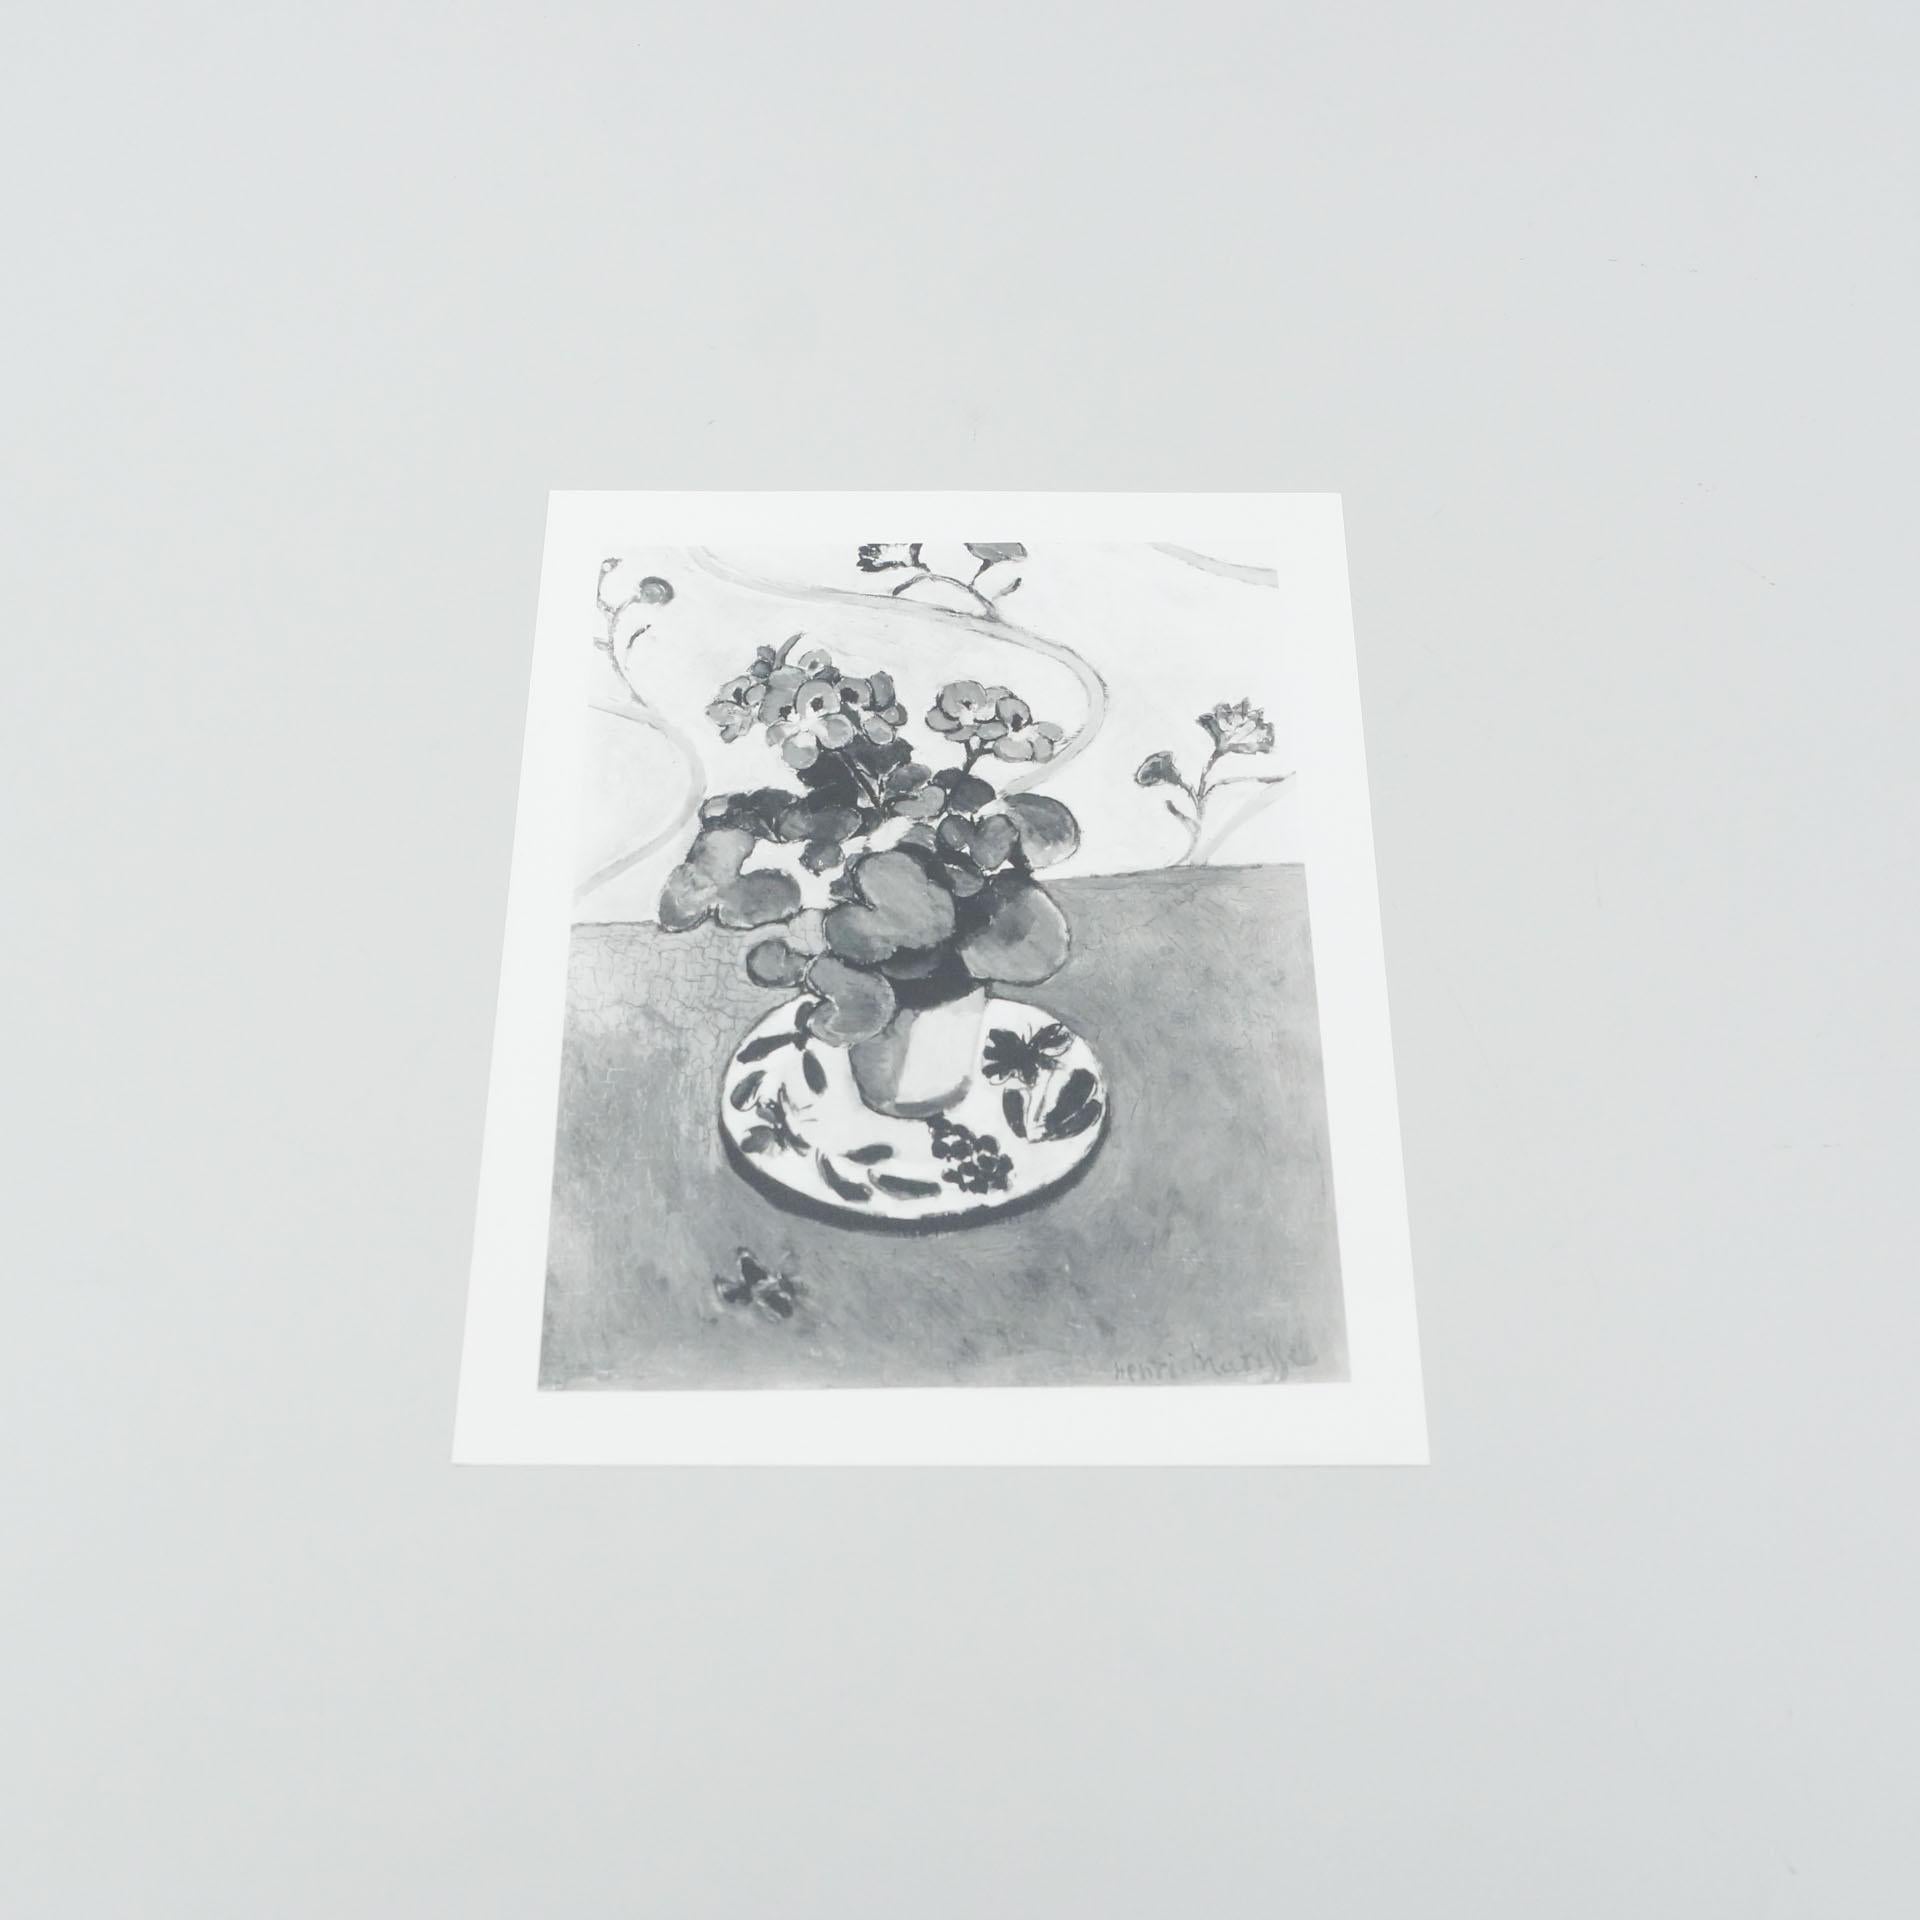 Black and white photography of henri matisse 'Geraniums', by Cleveland Museum of Art from 1993.

In original condition, with minor wear consistent with age and use, preserving a beautiful patina.

Materials:
Paper

Dimensions:
D 0.2 cm x W